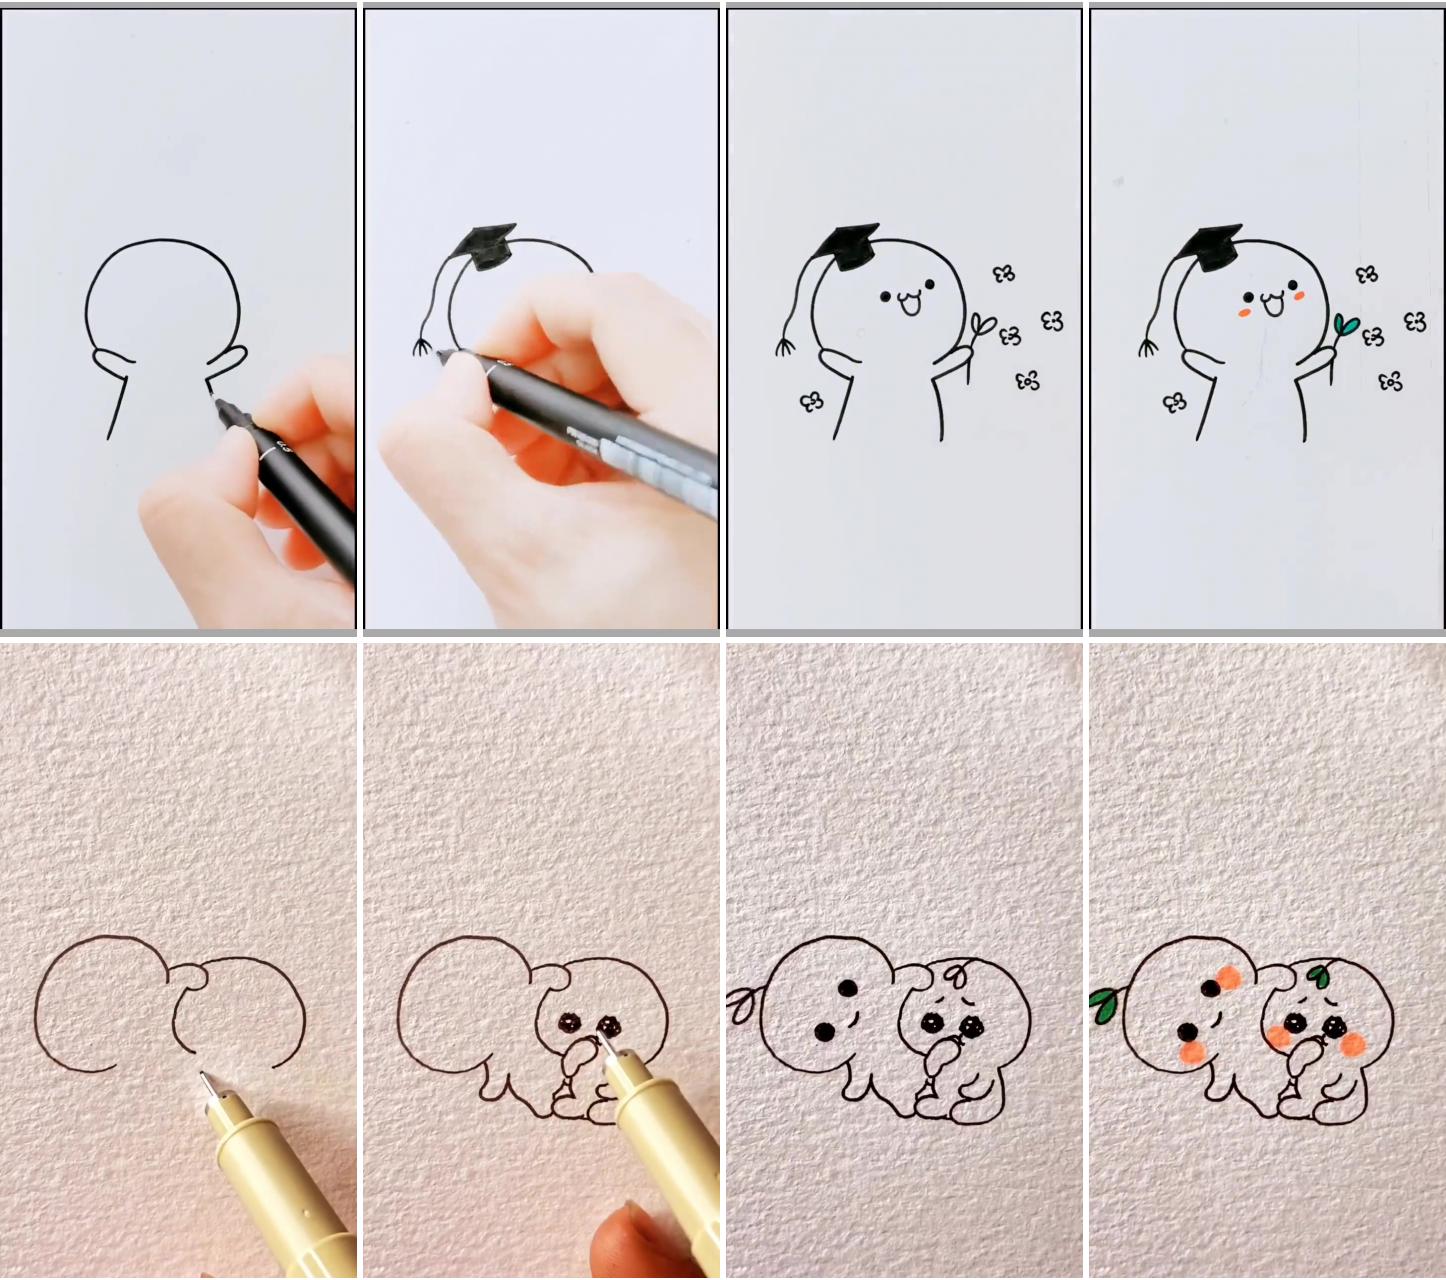 How to draw a sketch - easy drawing tutorials | my true friend  #easy drawing kawaii